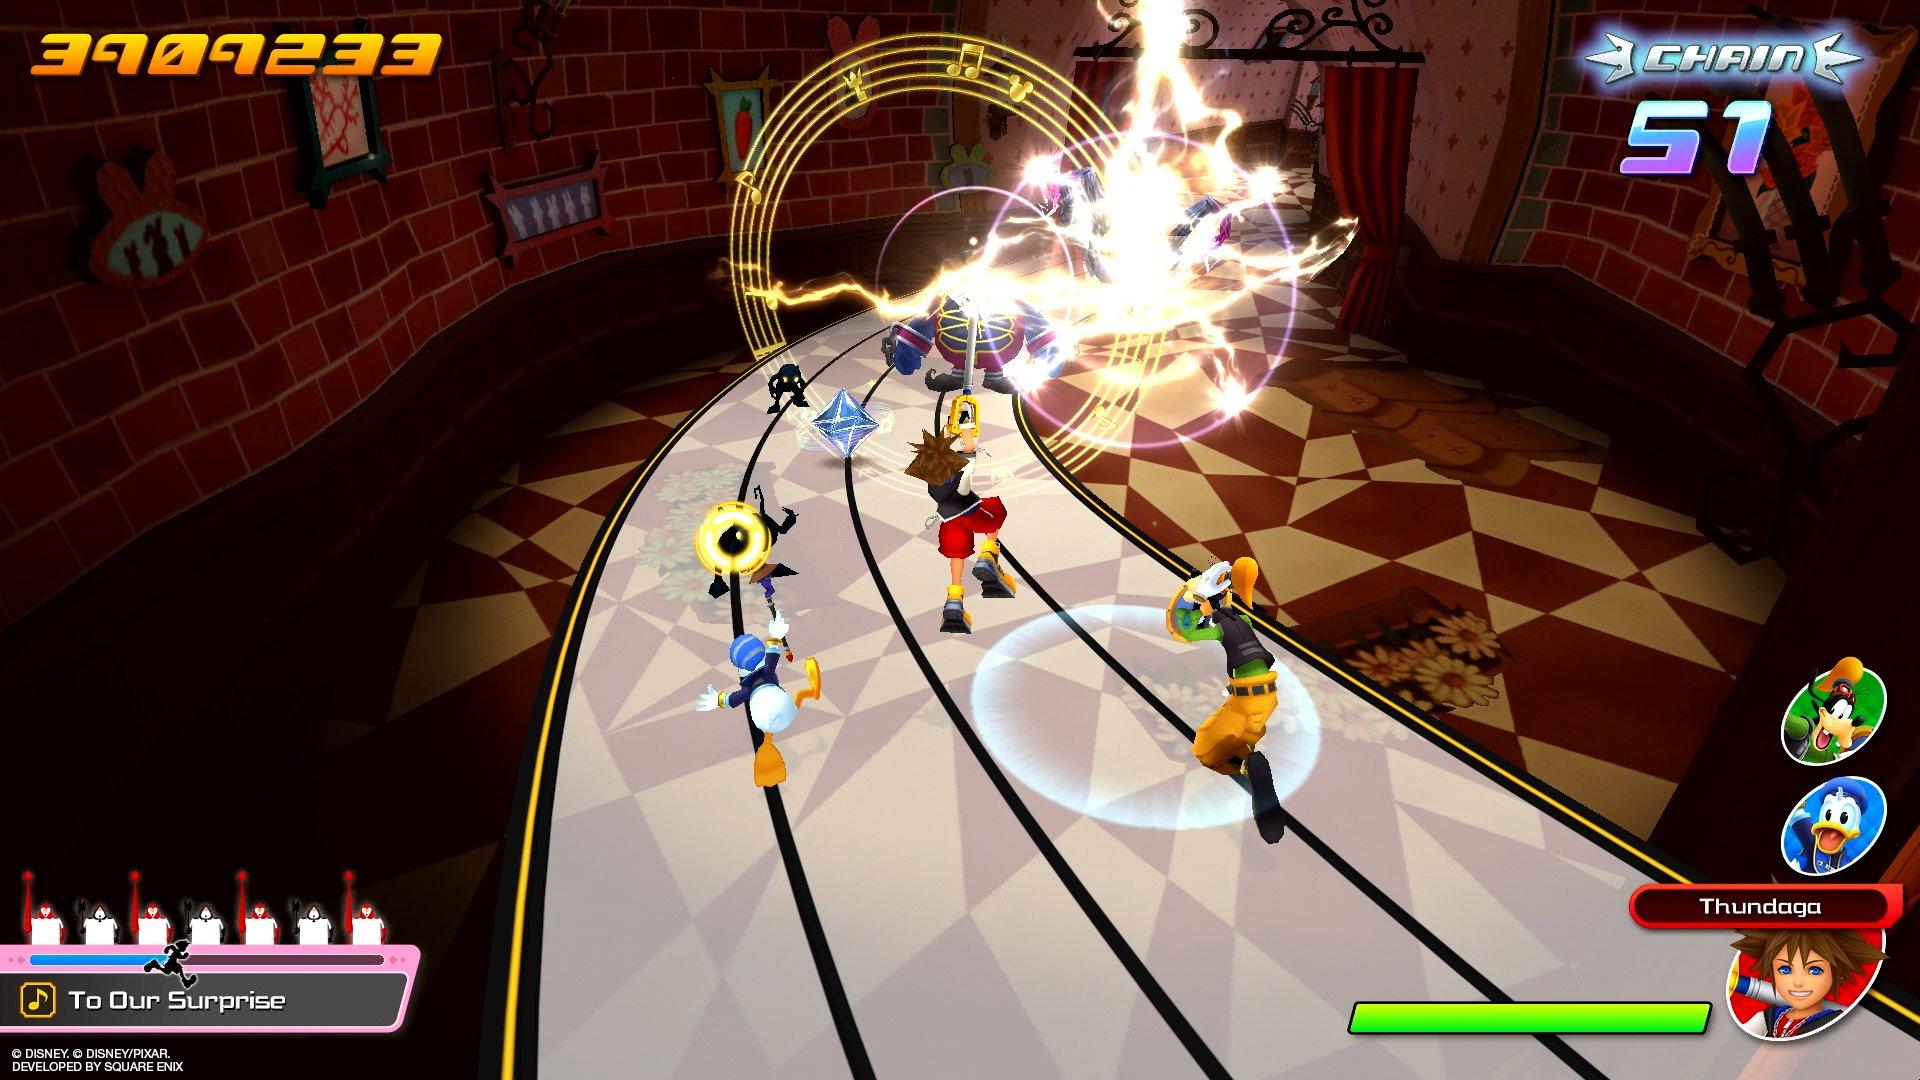 Kingdom Hearts comes to the Switch with Melody of Memory